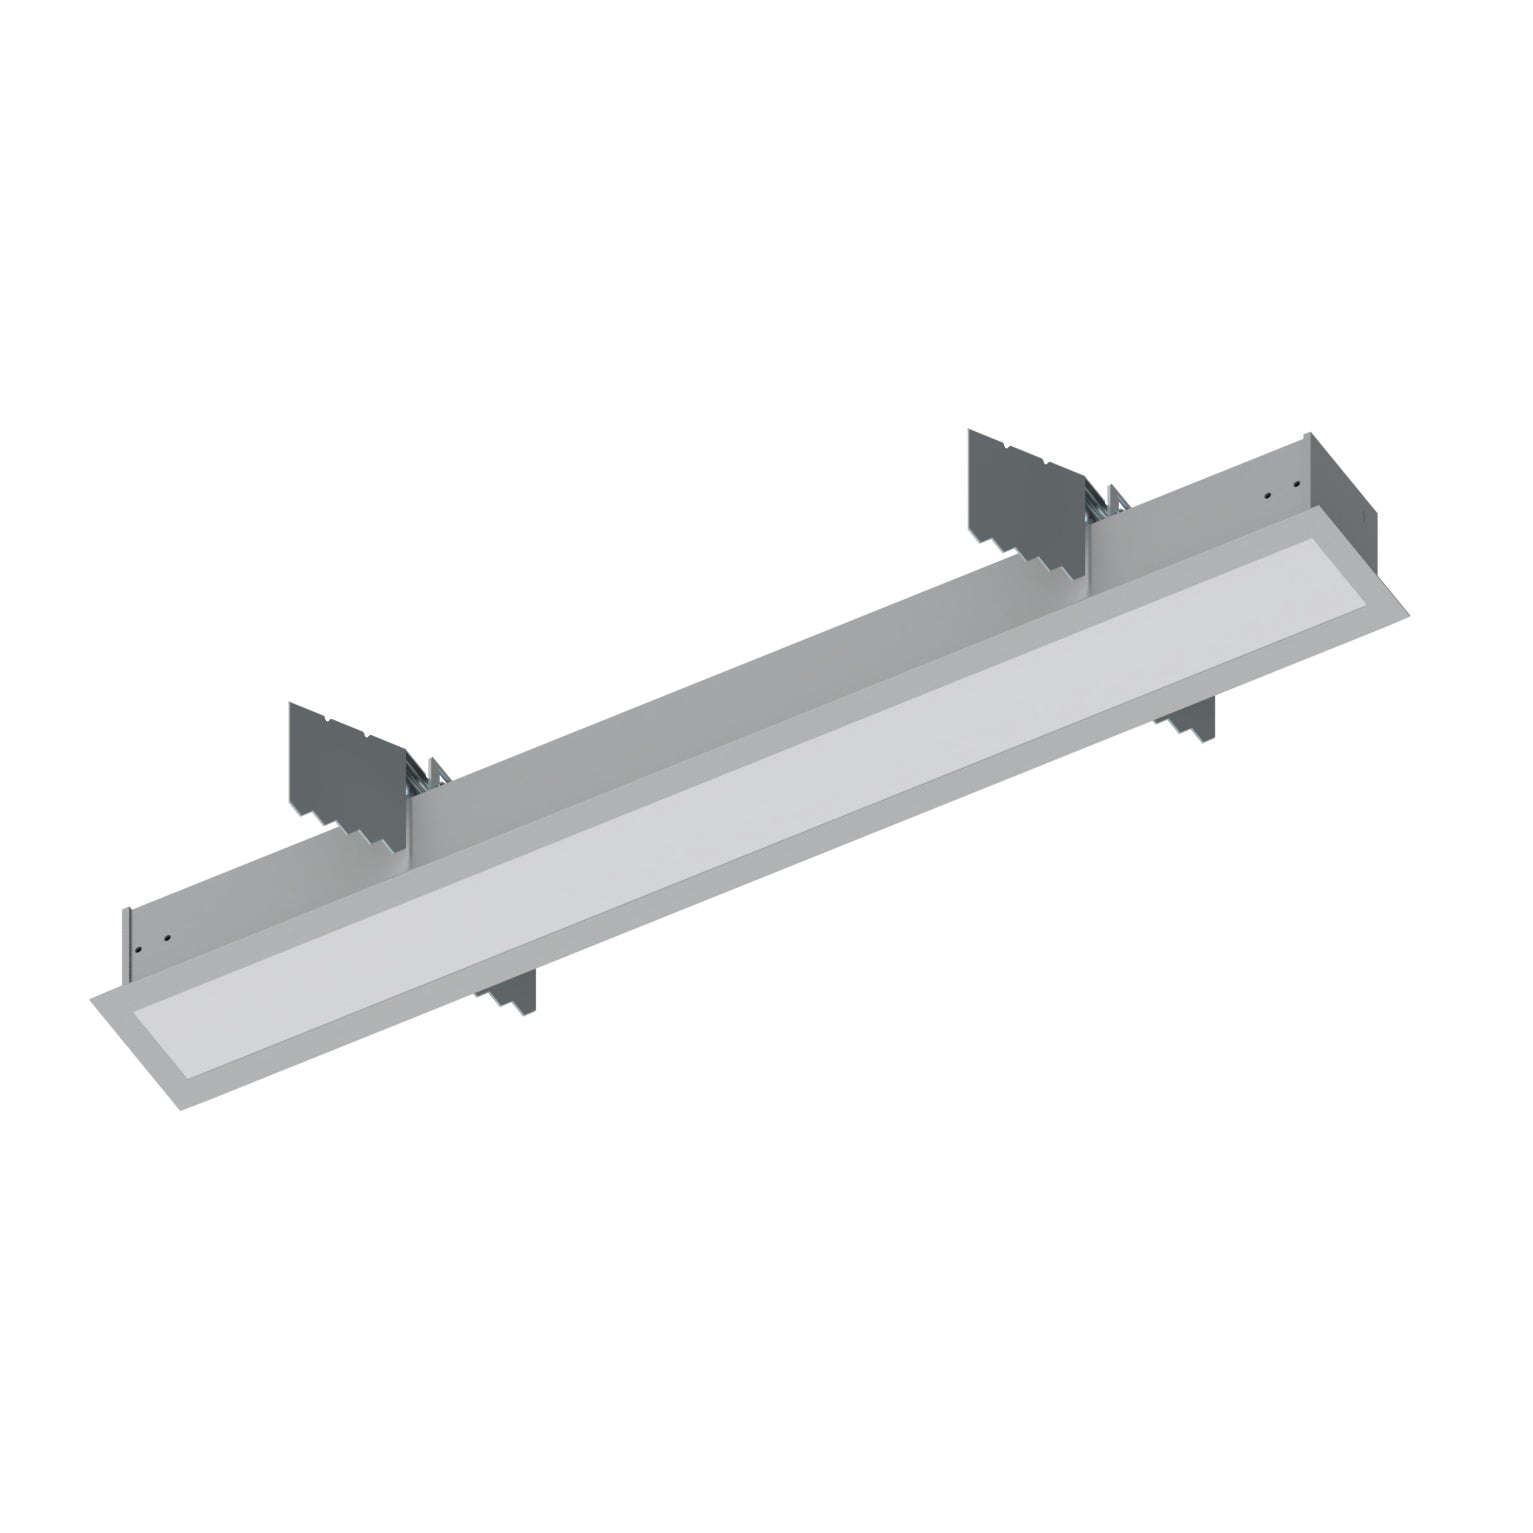 Nora Lighting NRLIN-21040A - Linear - 2' L-Line LED Recessed Linear, 2100lm / 4000K, Aluminum Finish